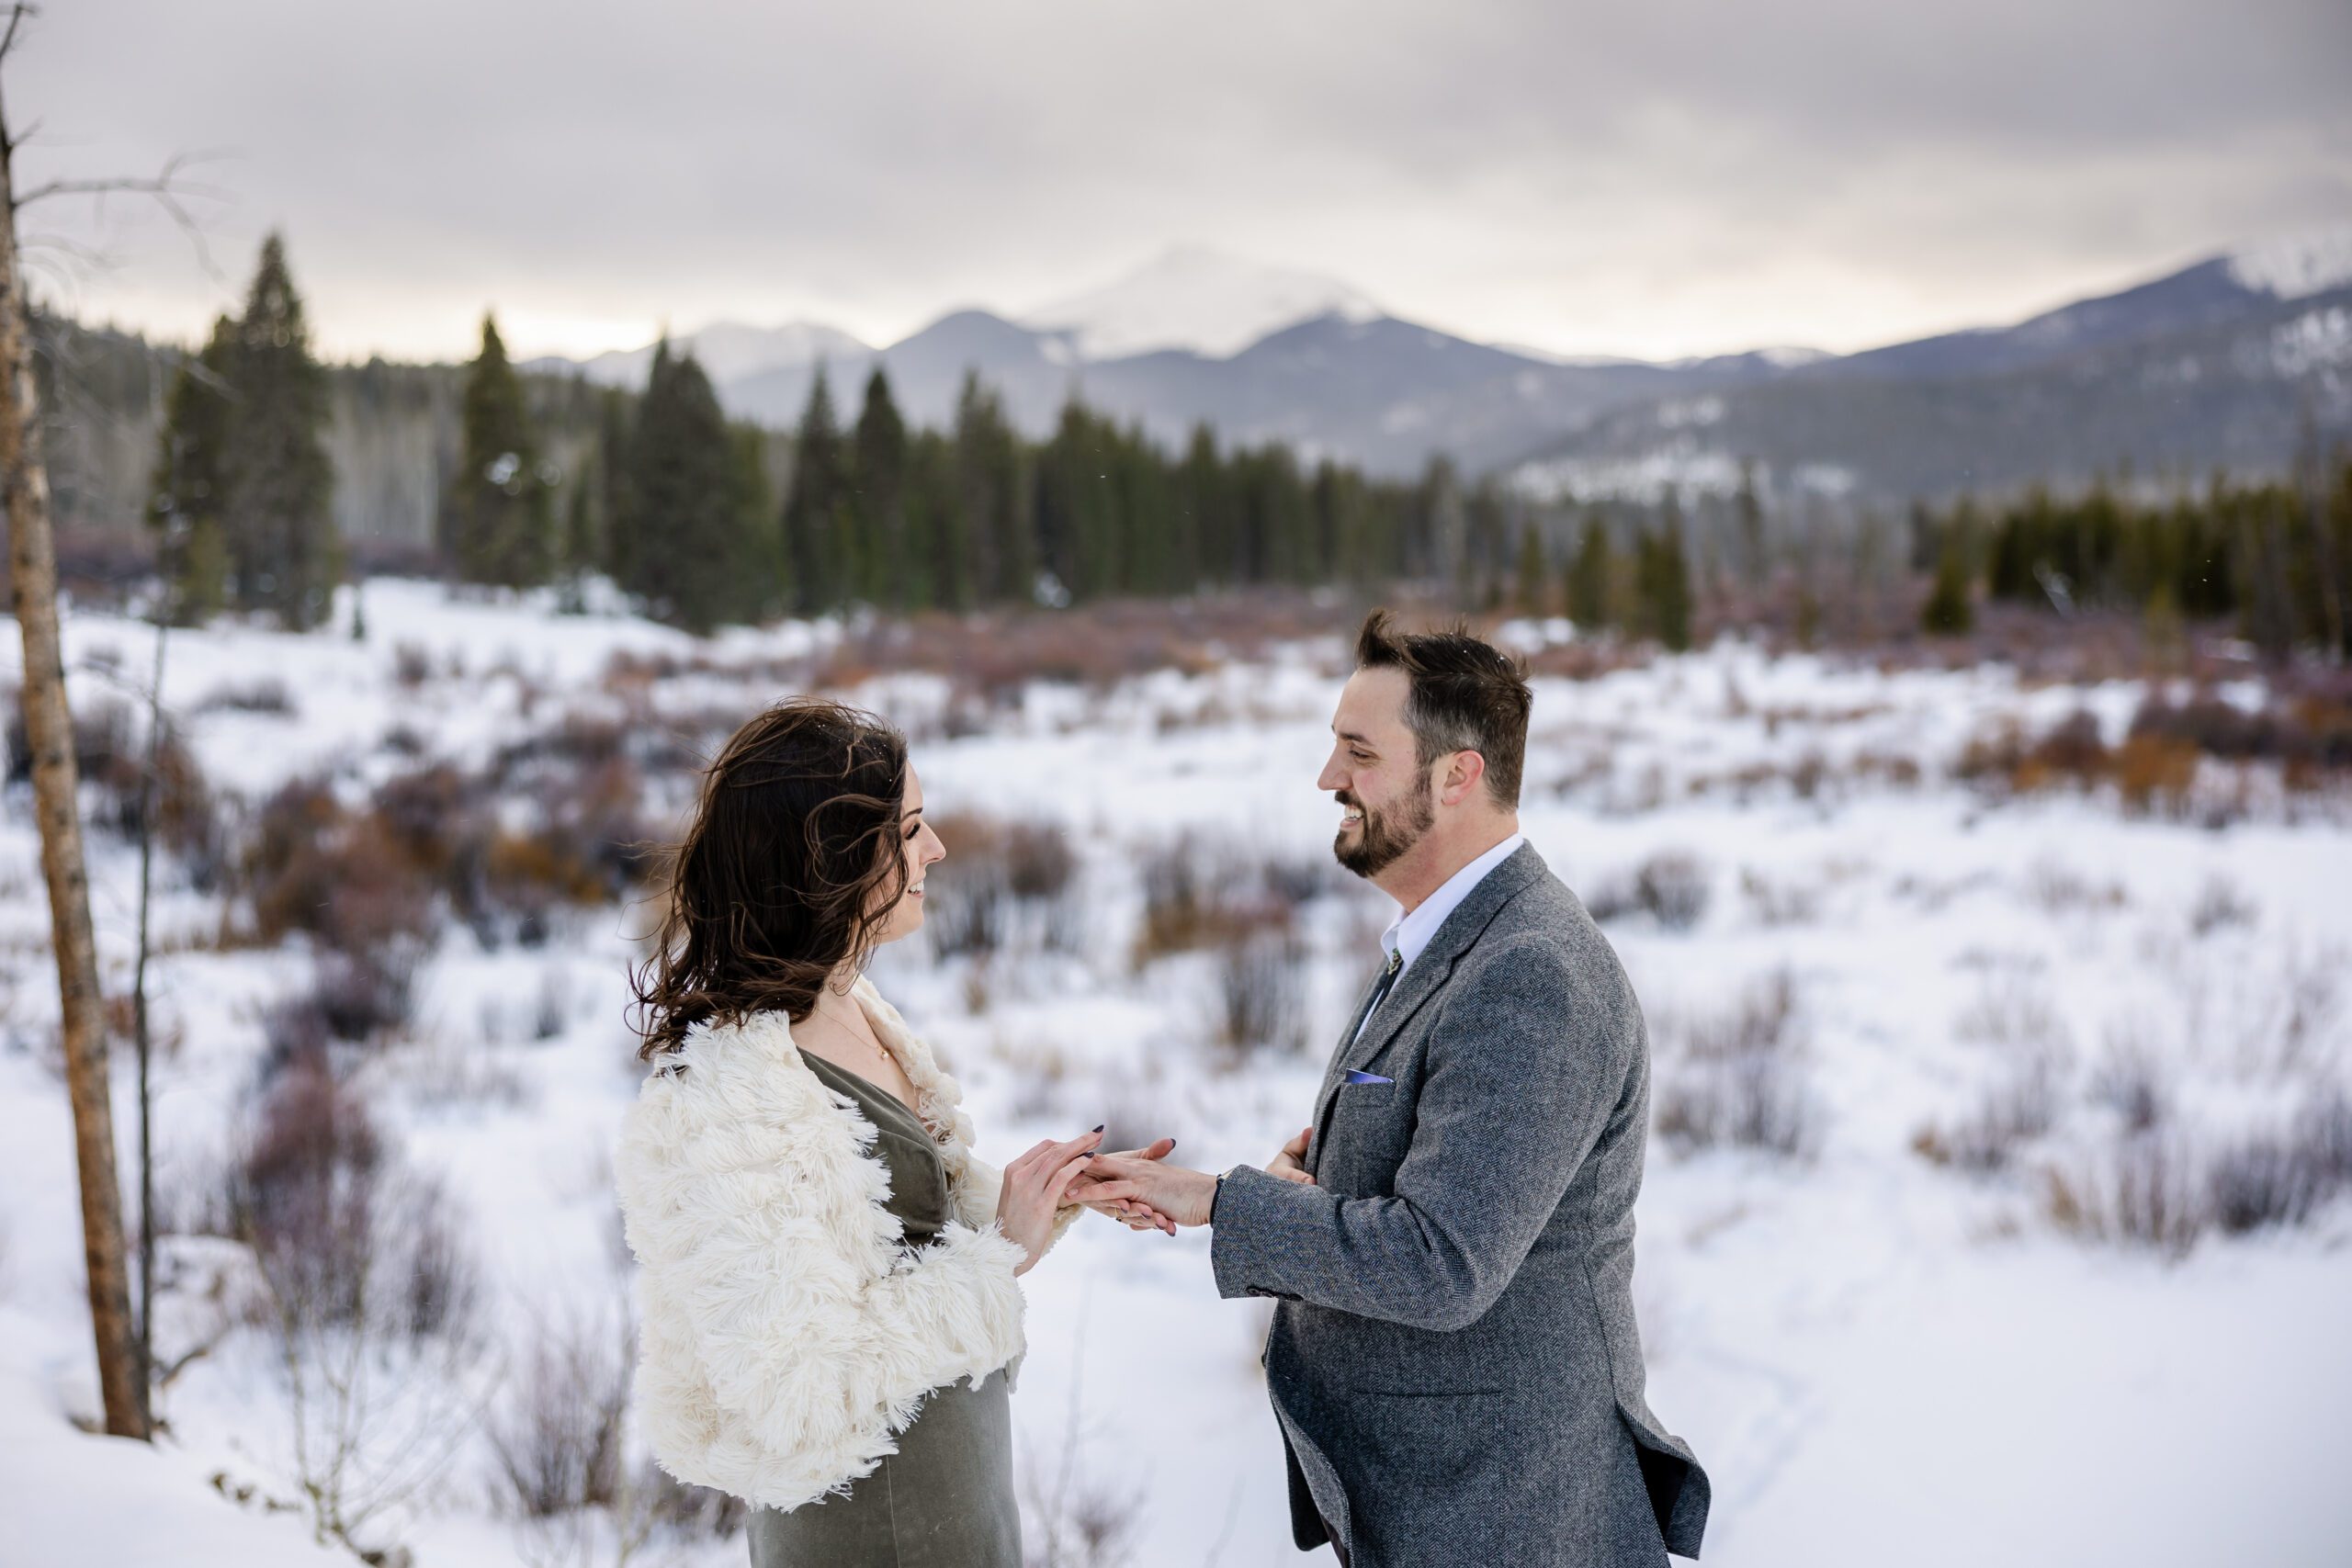 the bride putting a ring on her grooms finger, he is smiling at her during their Winter Park elopement ceremony. 